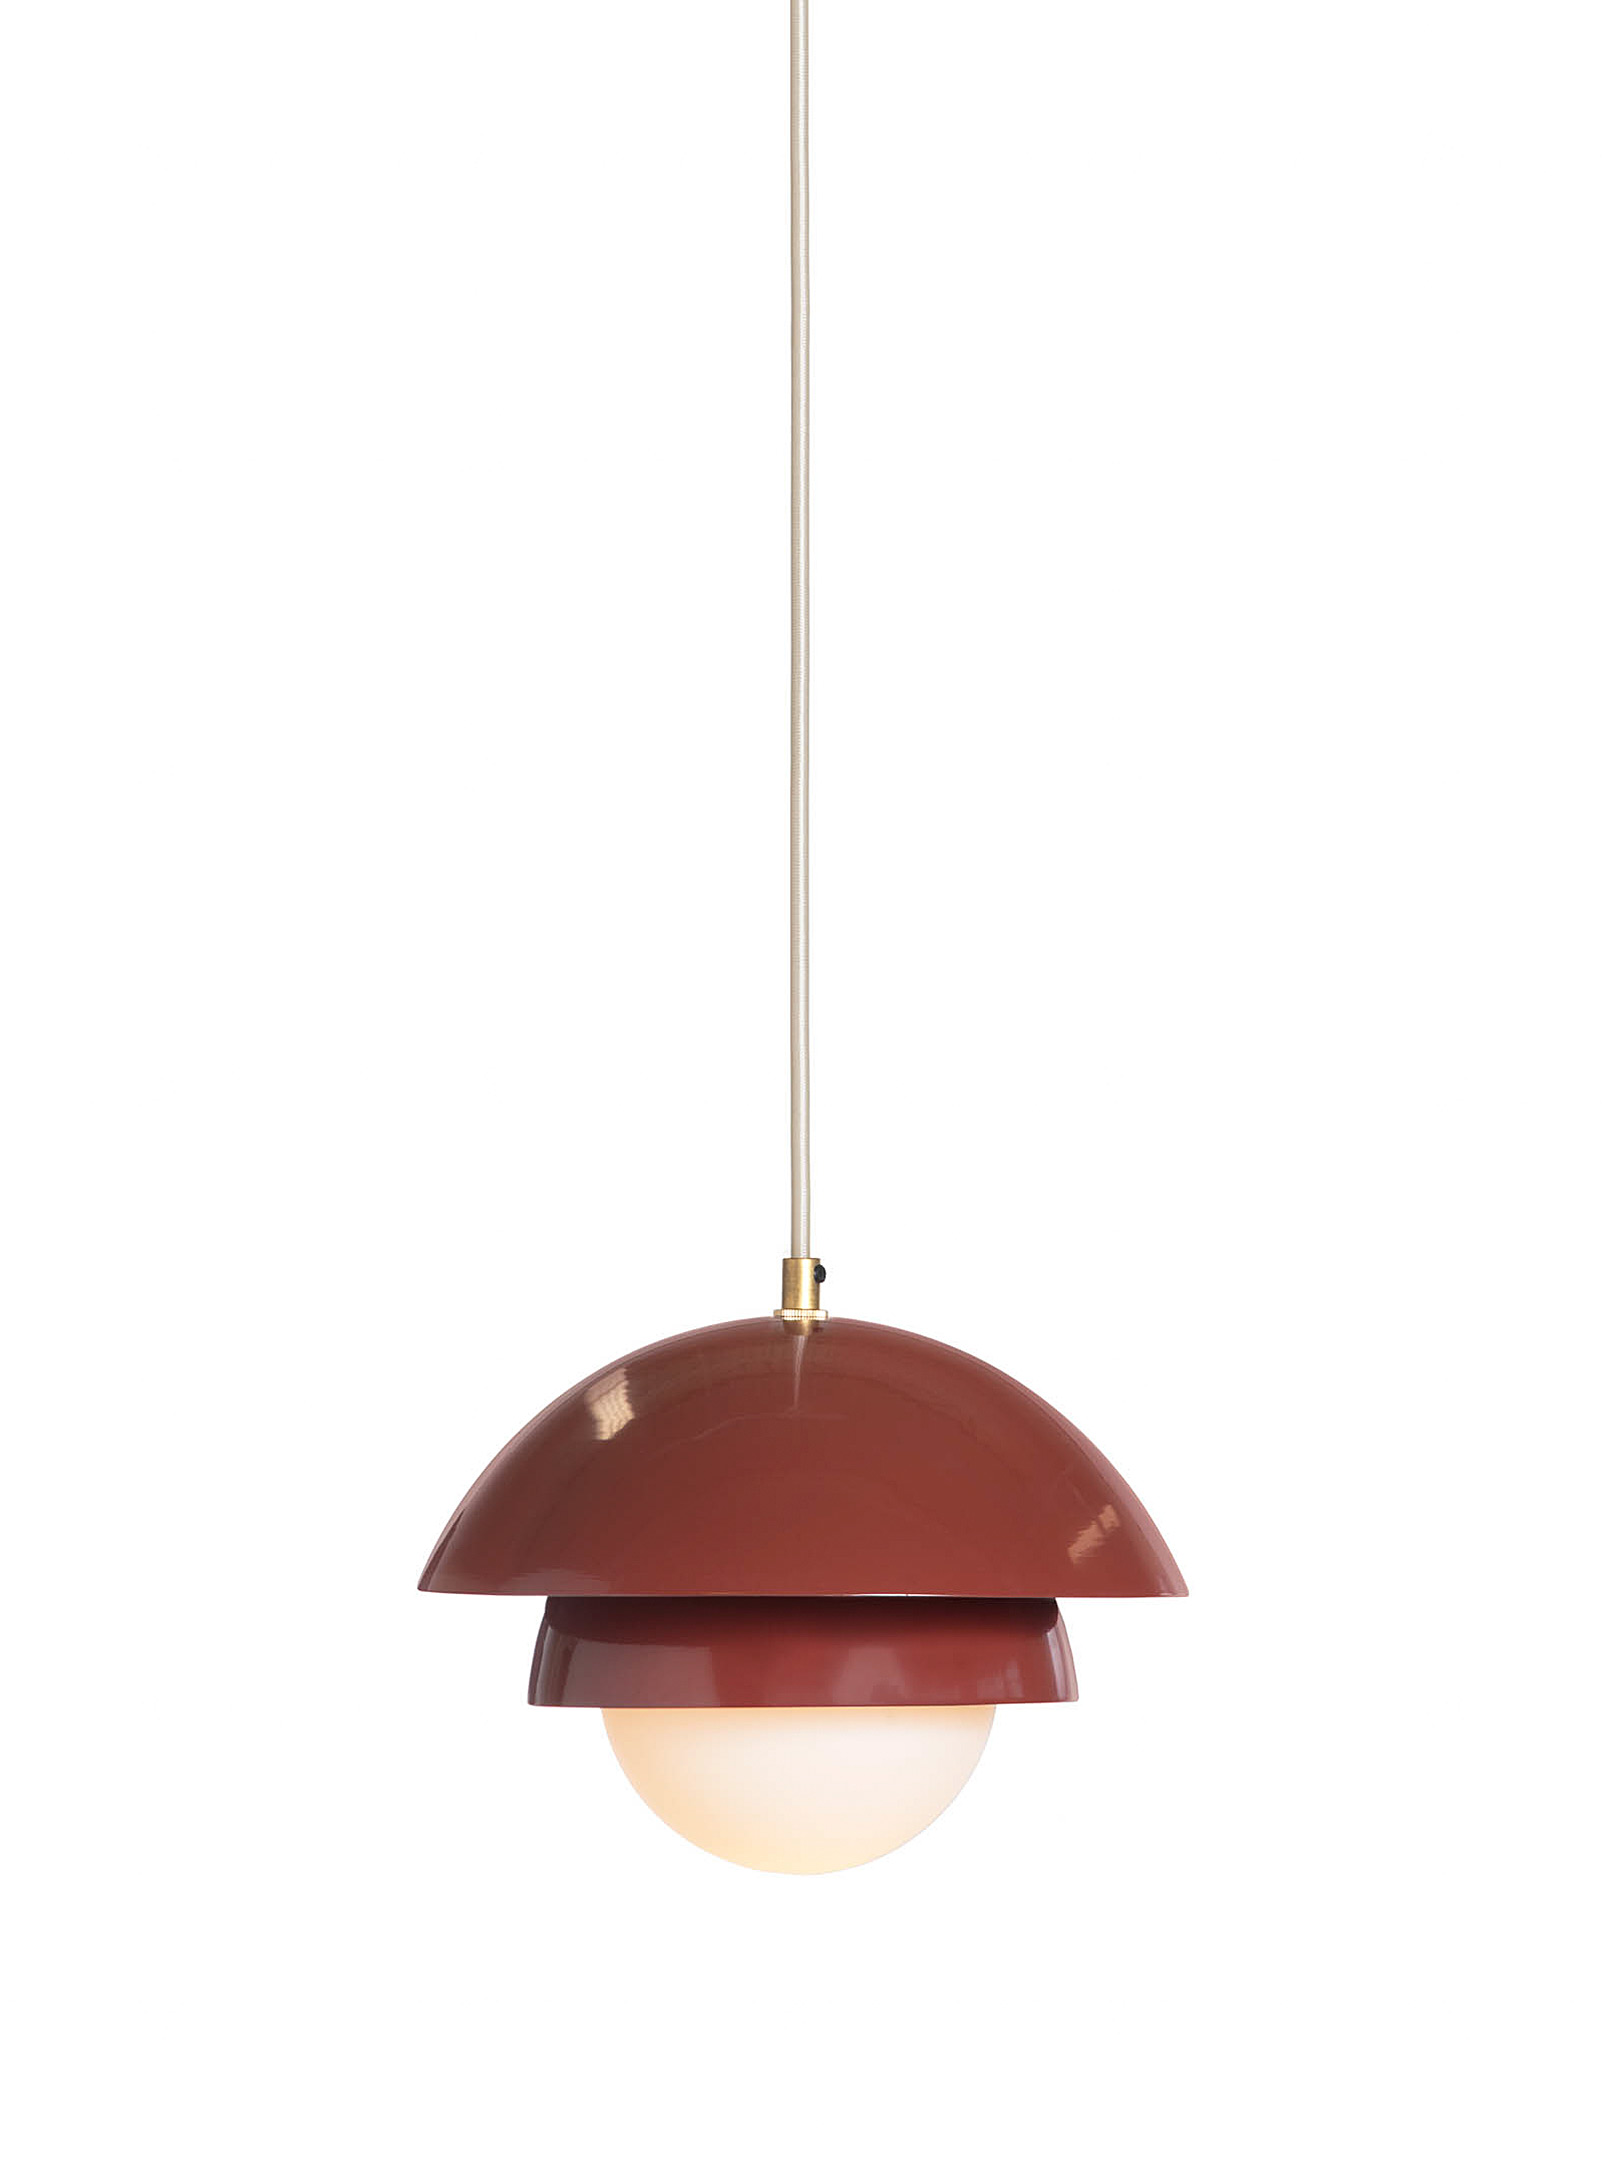 Luminaire Authentik Finlandaise Hanging Lamp In Ruby Red